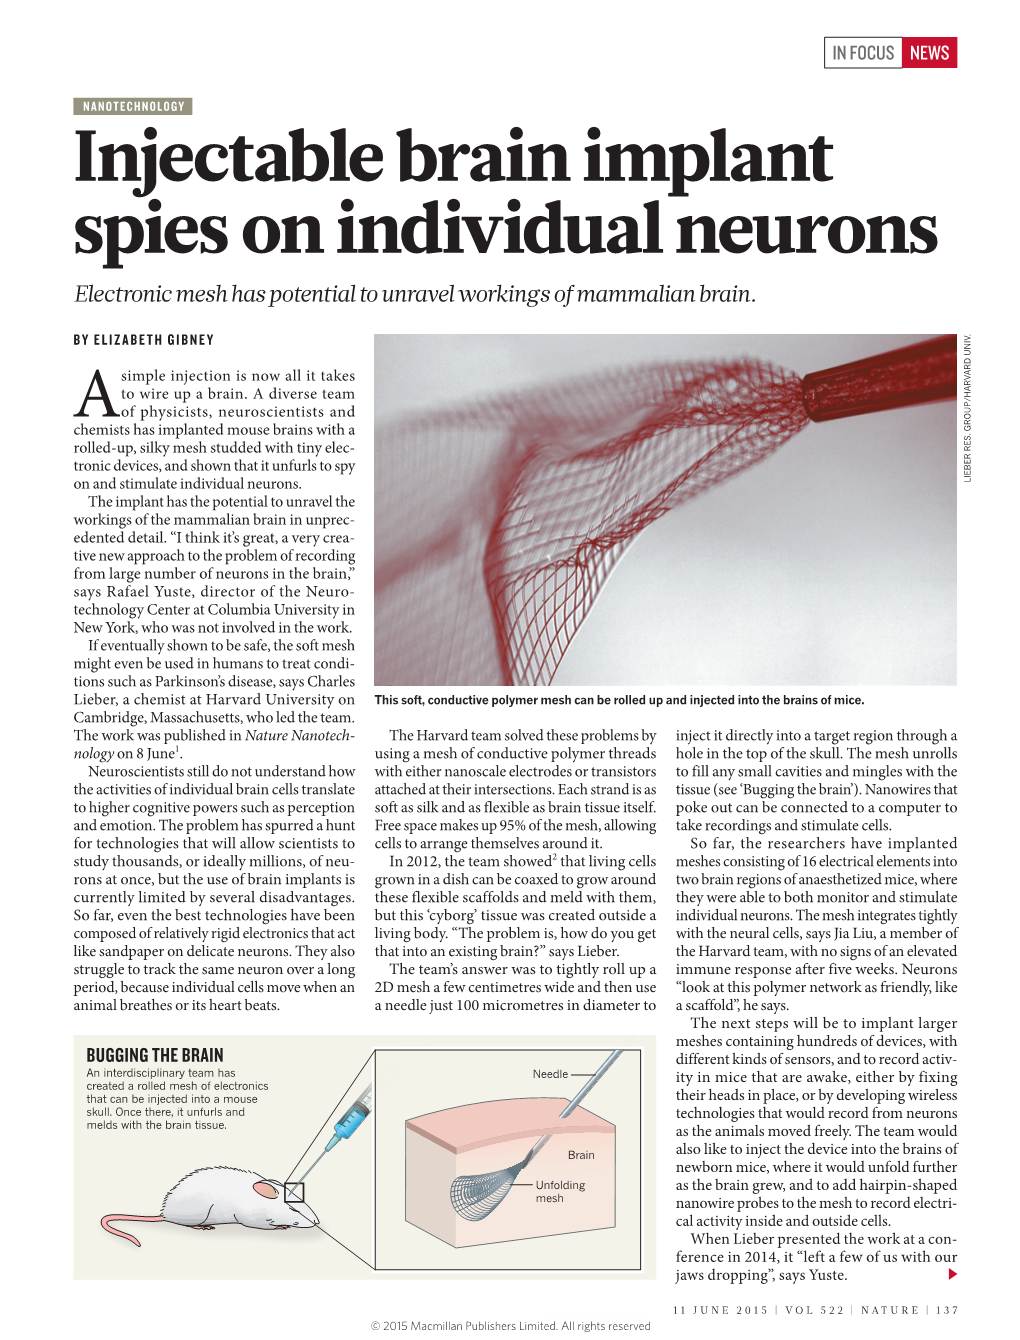 Injectable Brain Implant Spies on Individual Neurons Electronic Mesh Has Potential to Unravel Workings of Mammalian Brain